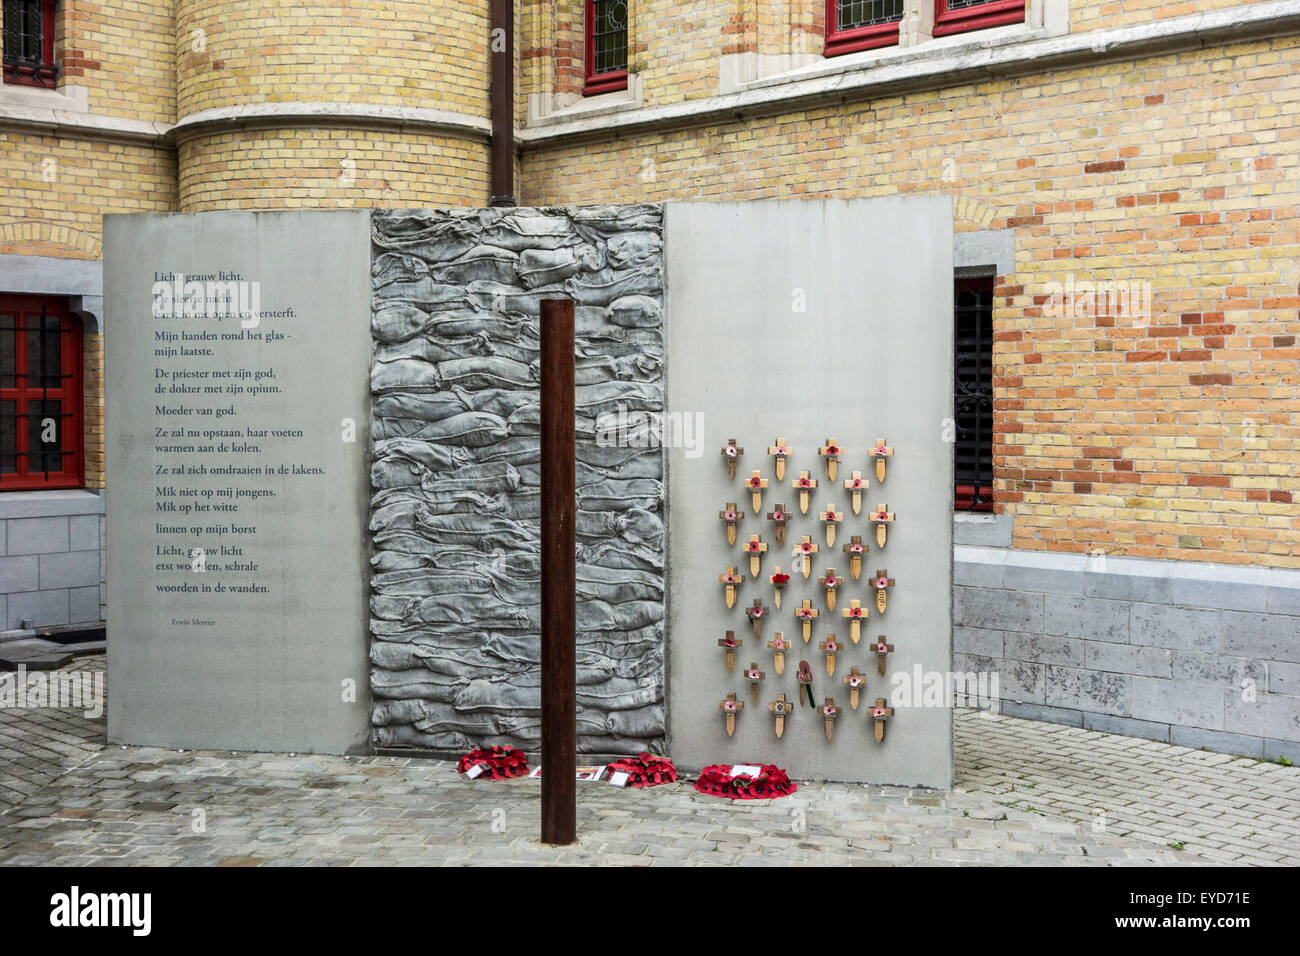 World War One execution pole and poem by Erwin Mortier at inner courtyard of the Poperinge town hall, West Flanders, Belgium Stock Photo